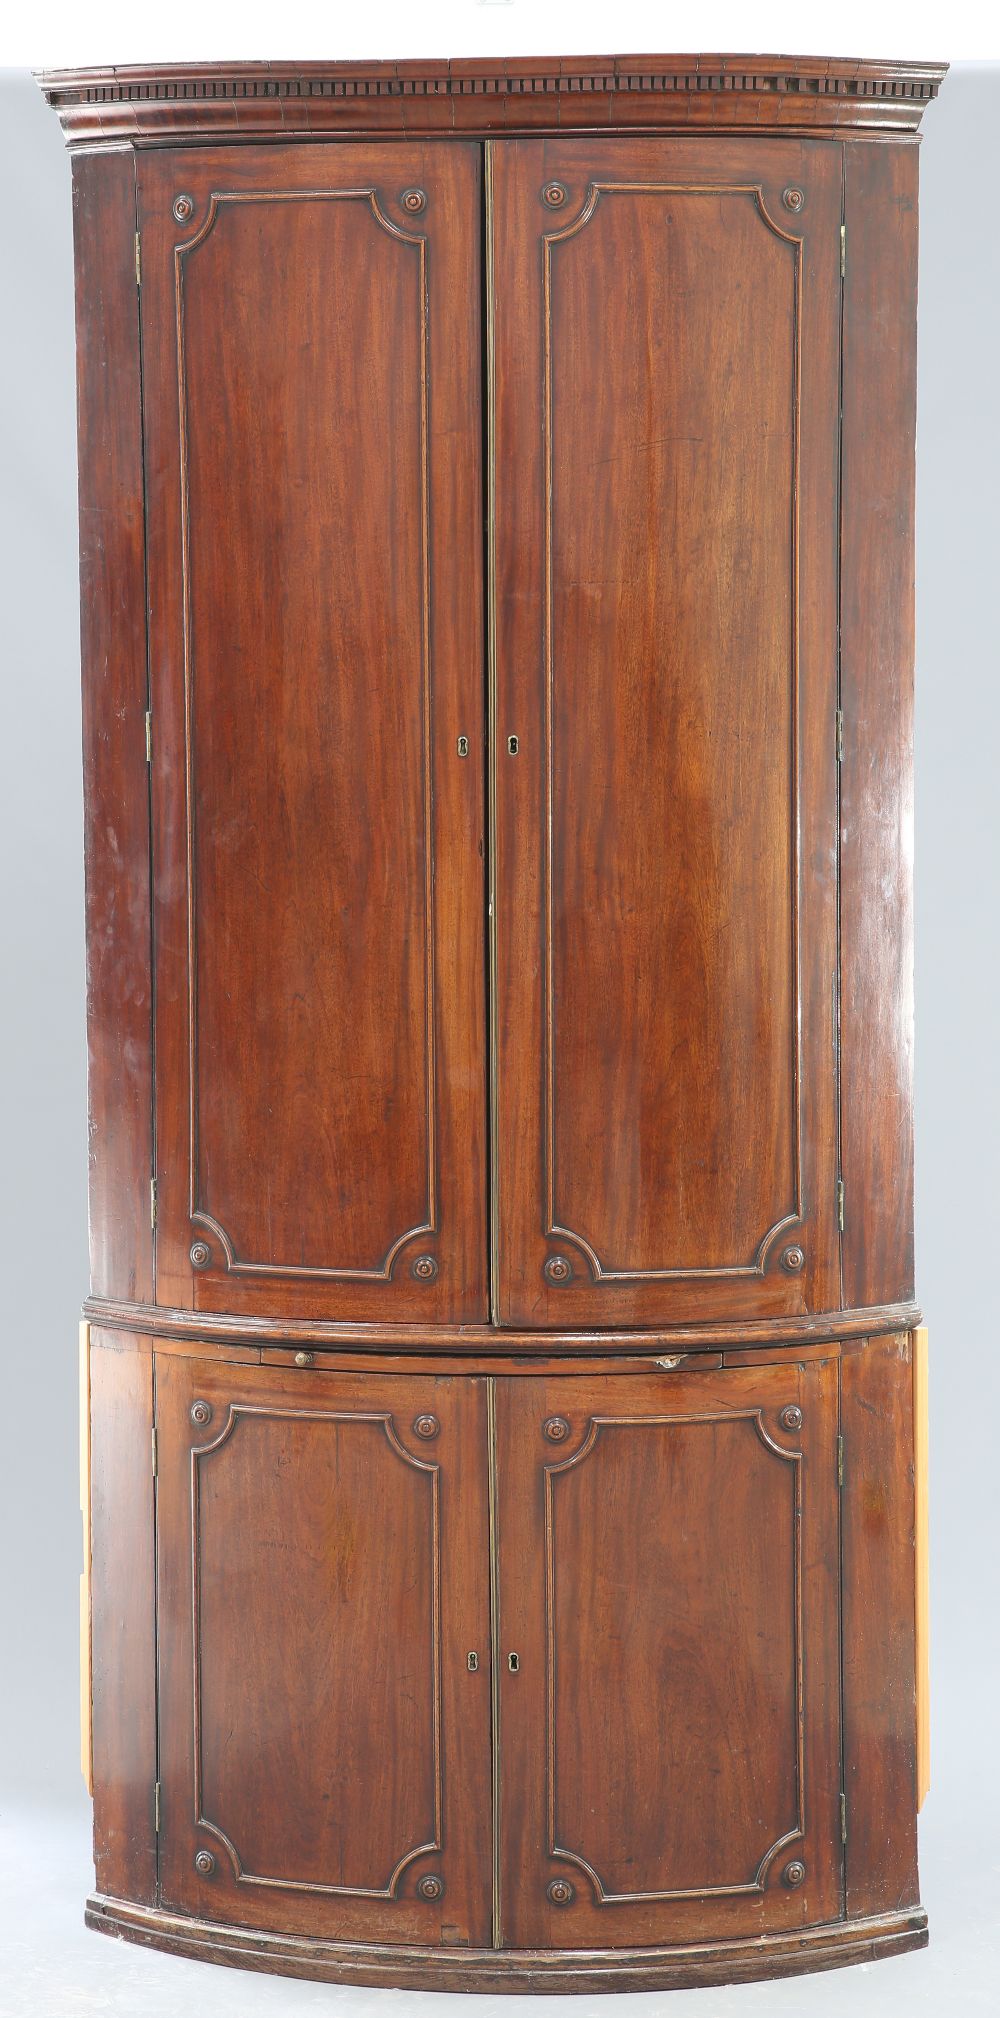 A LARGE GEORGE III MAHOGANY BOW-FRONT DOUBLE CORNER CUPBOARD